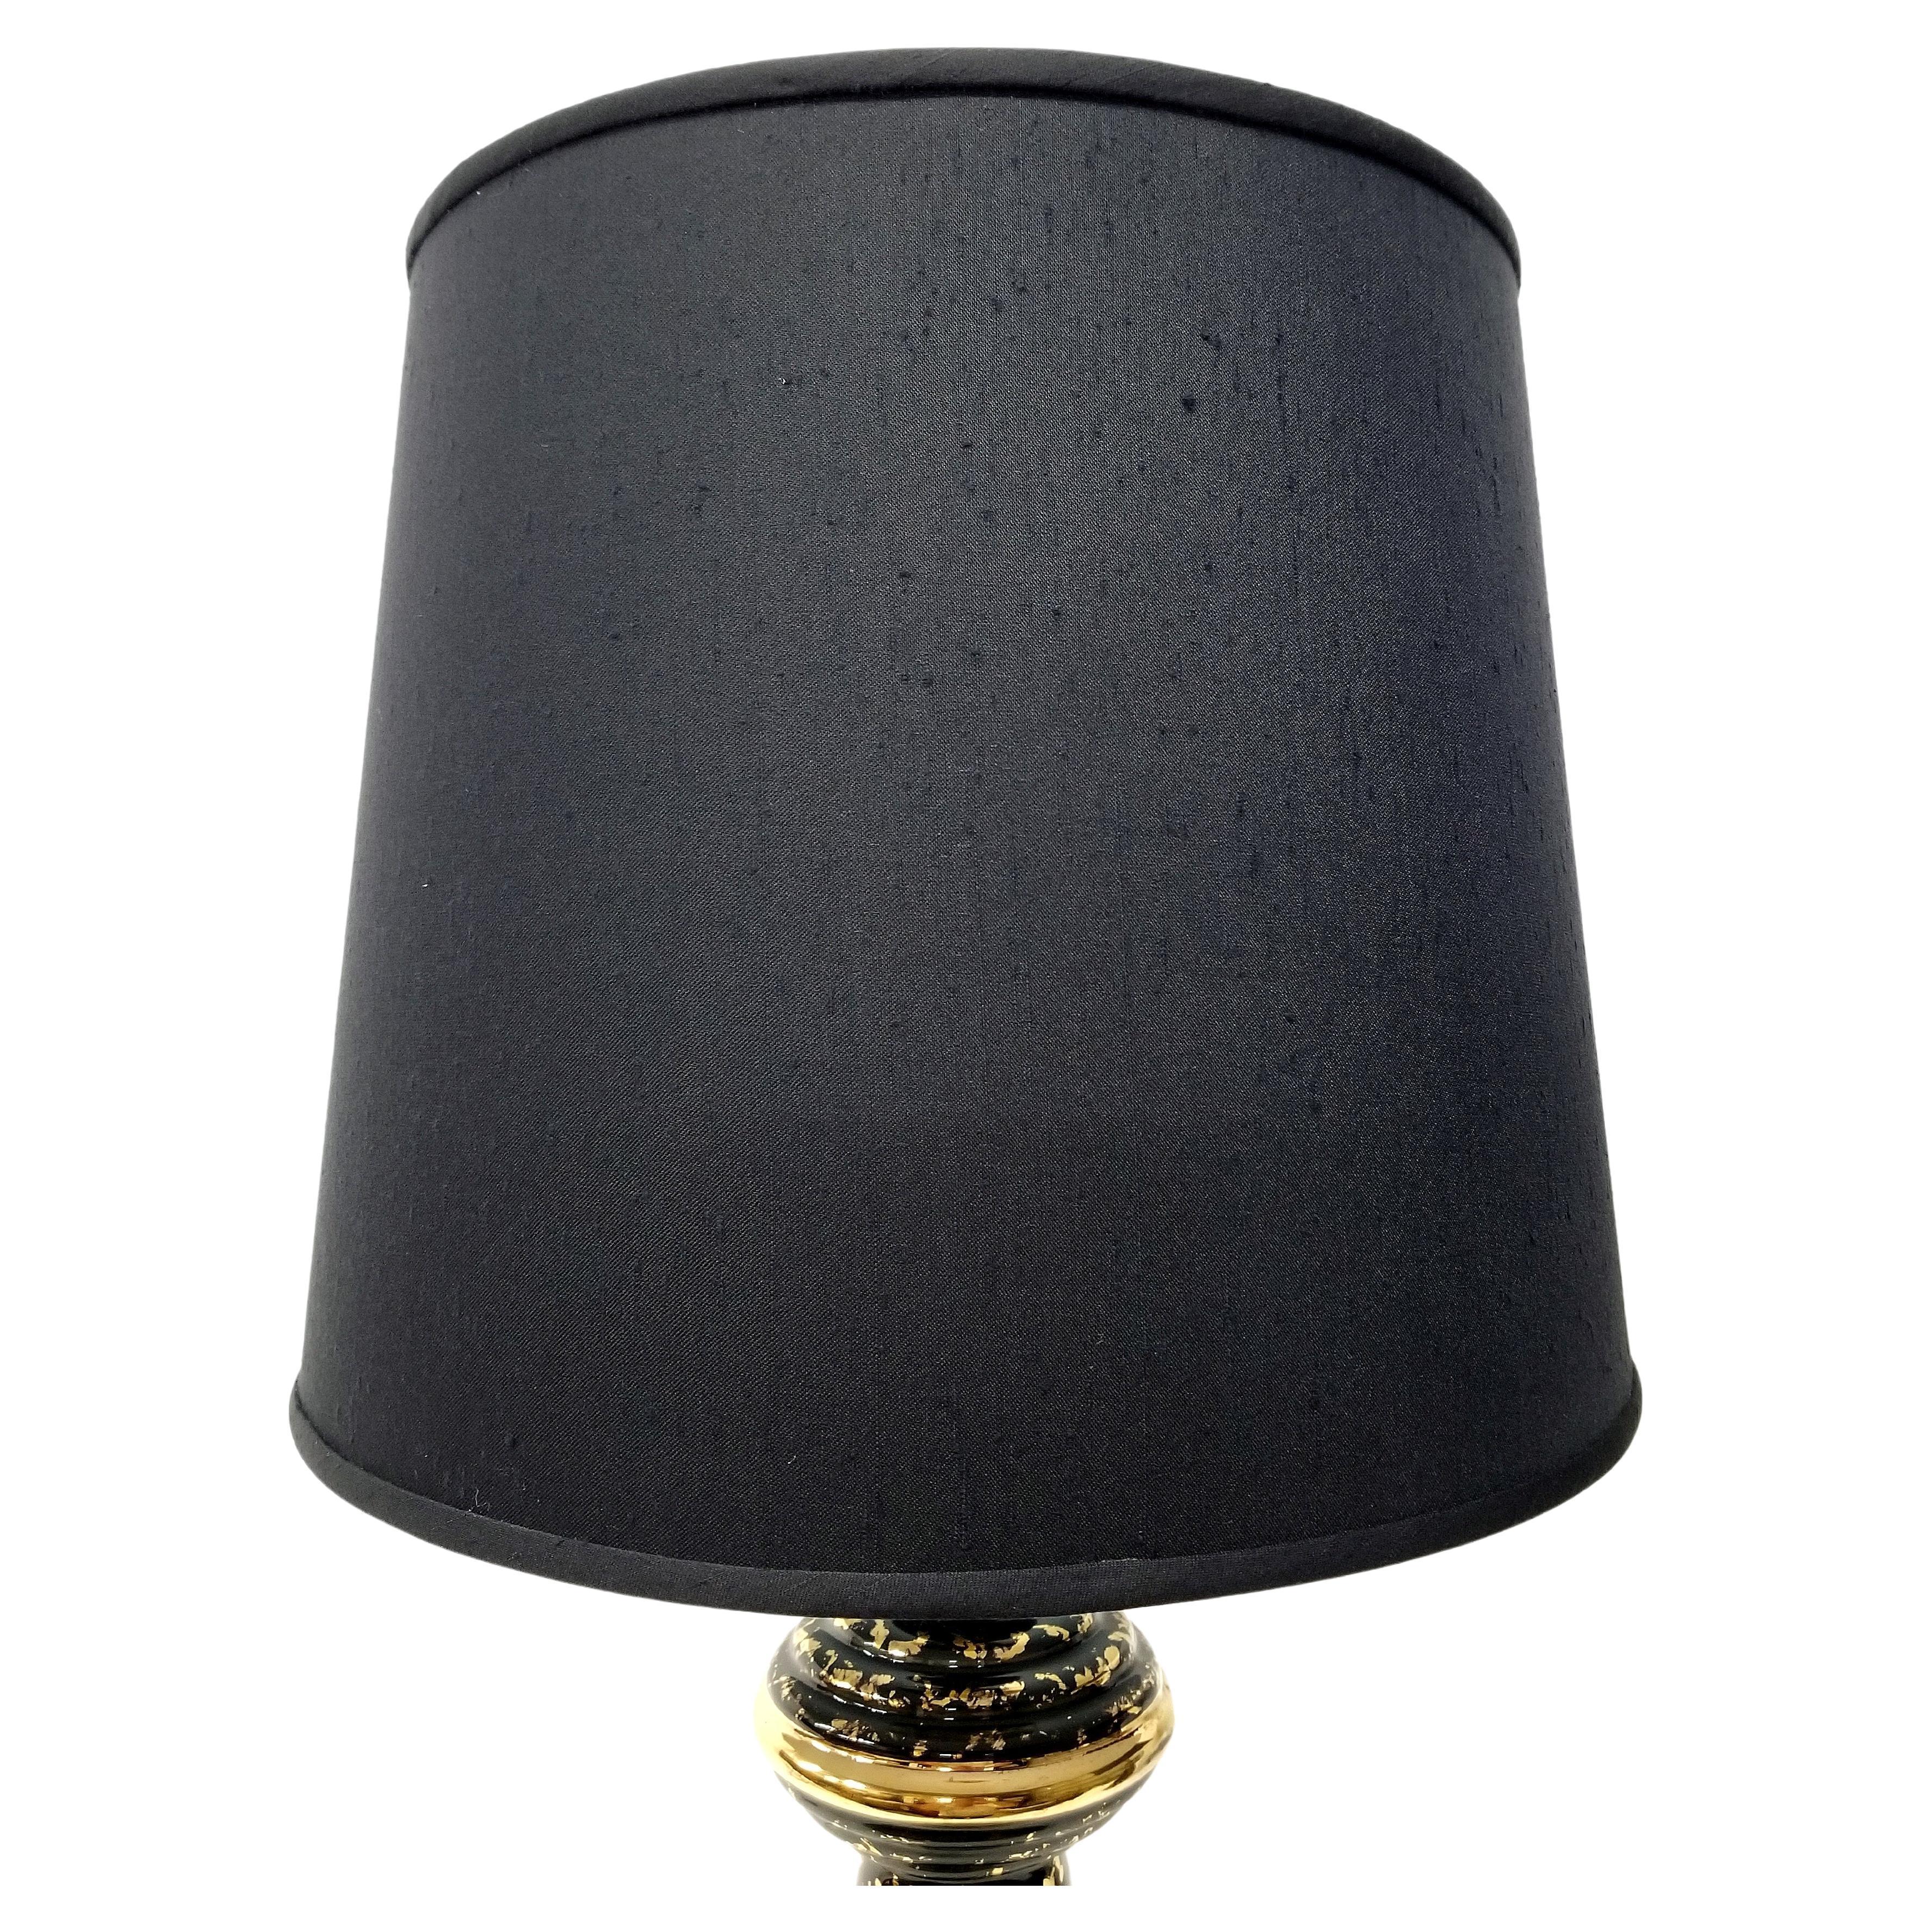 Mid-20th Century Art Deco Black and Gold Table Lamps with New Custom Shades - a Pair For Sale